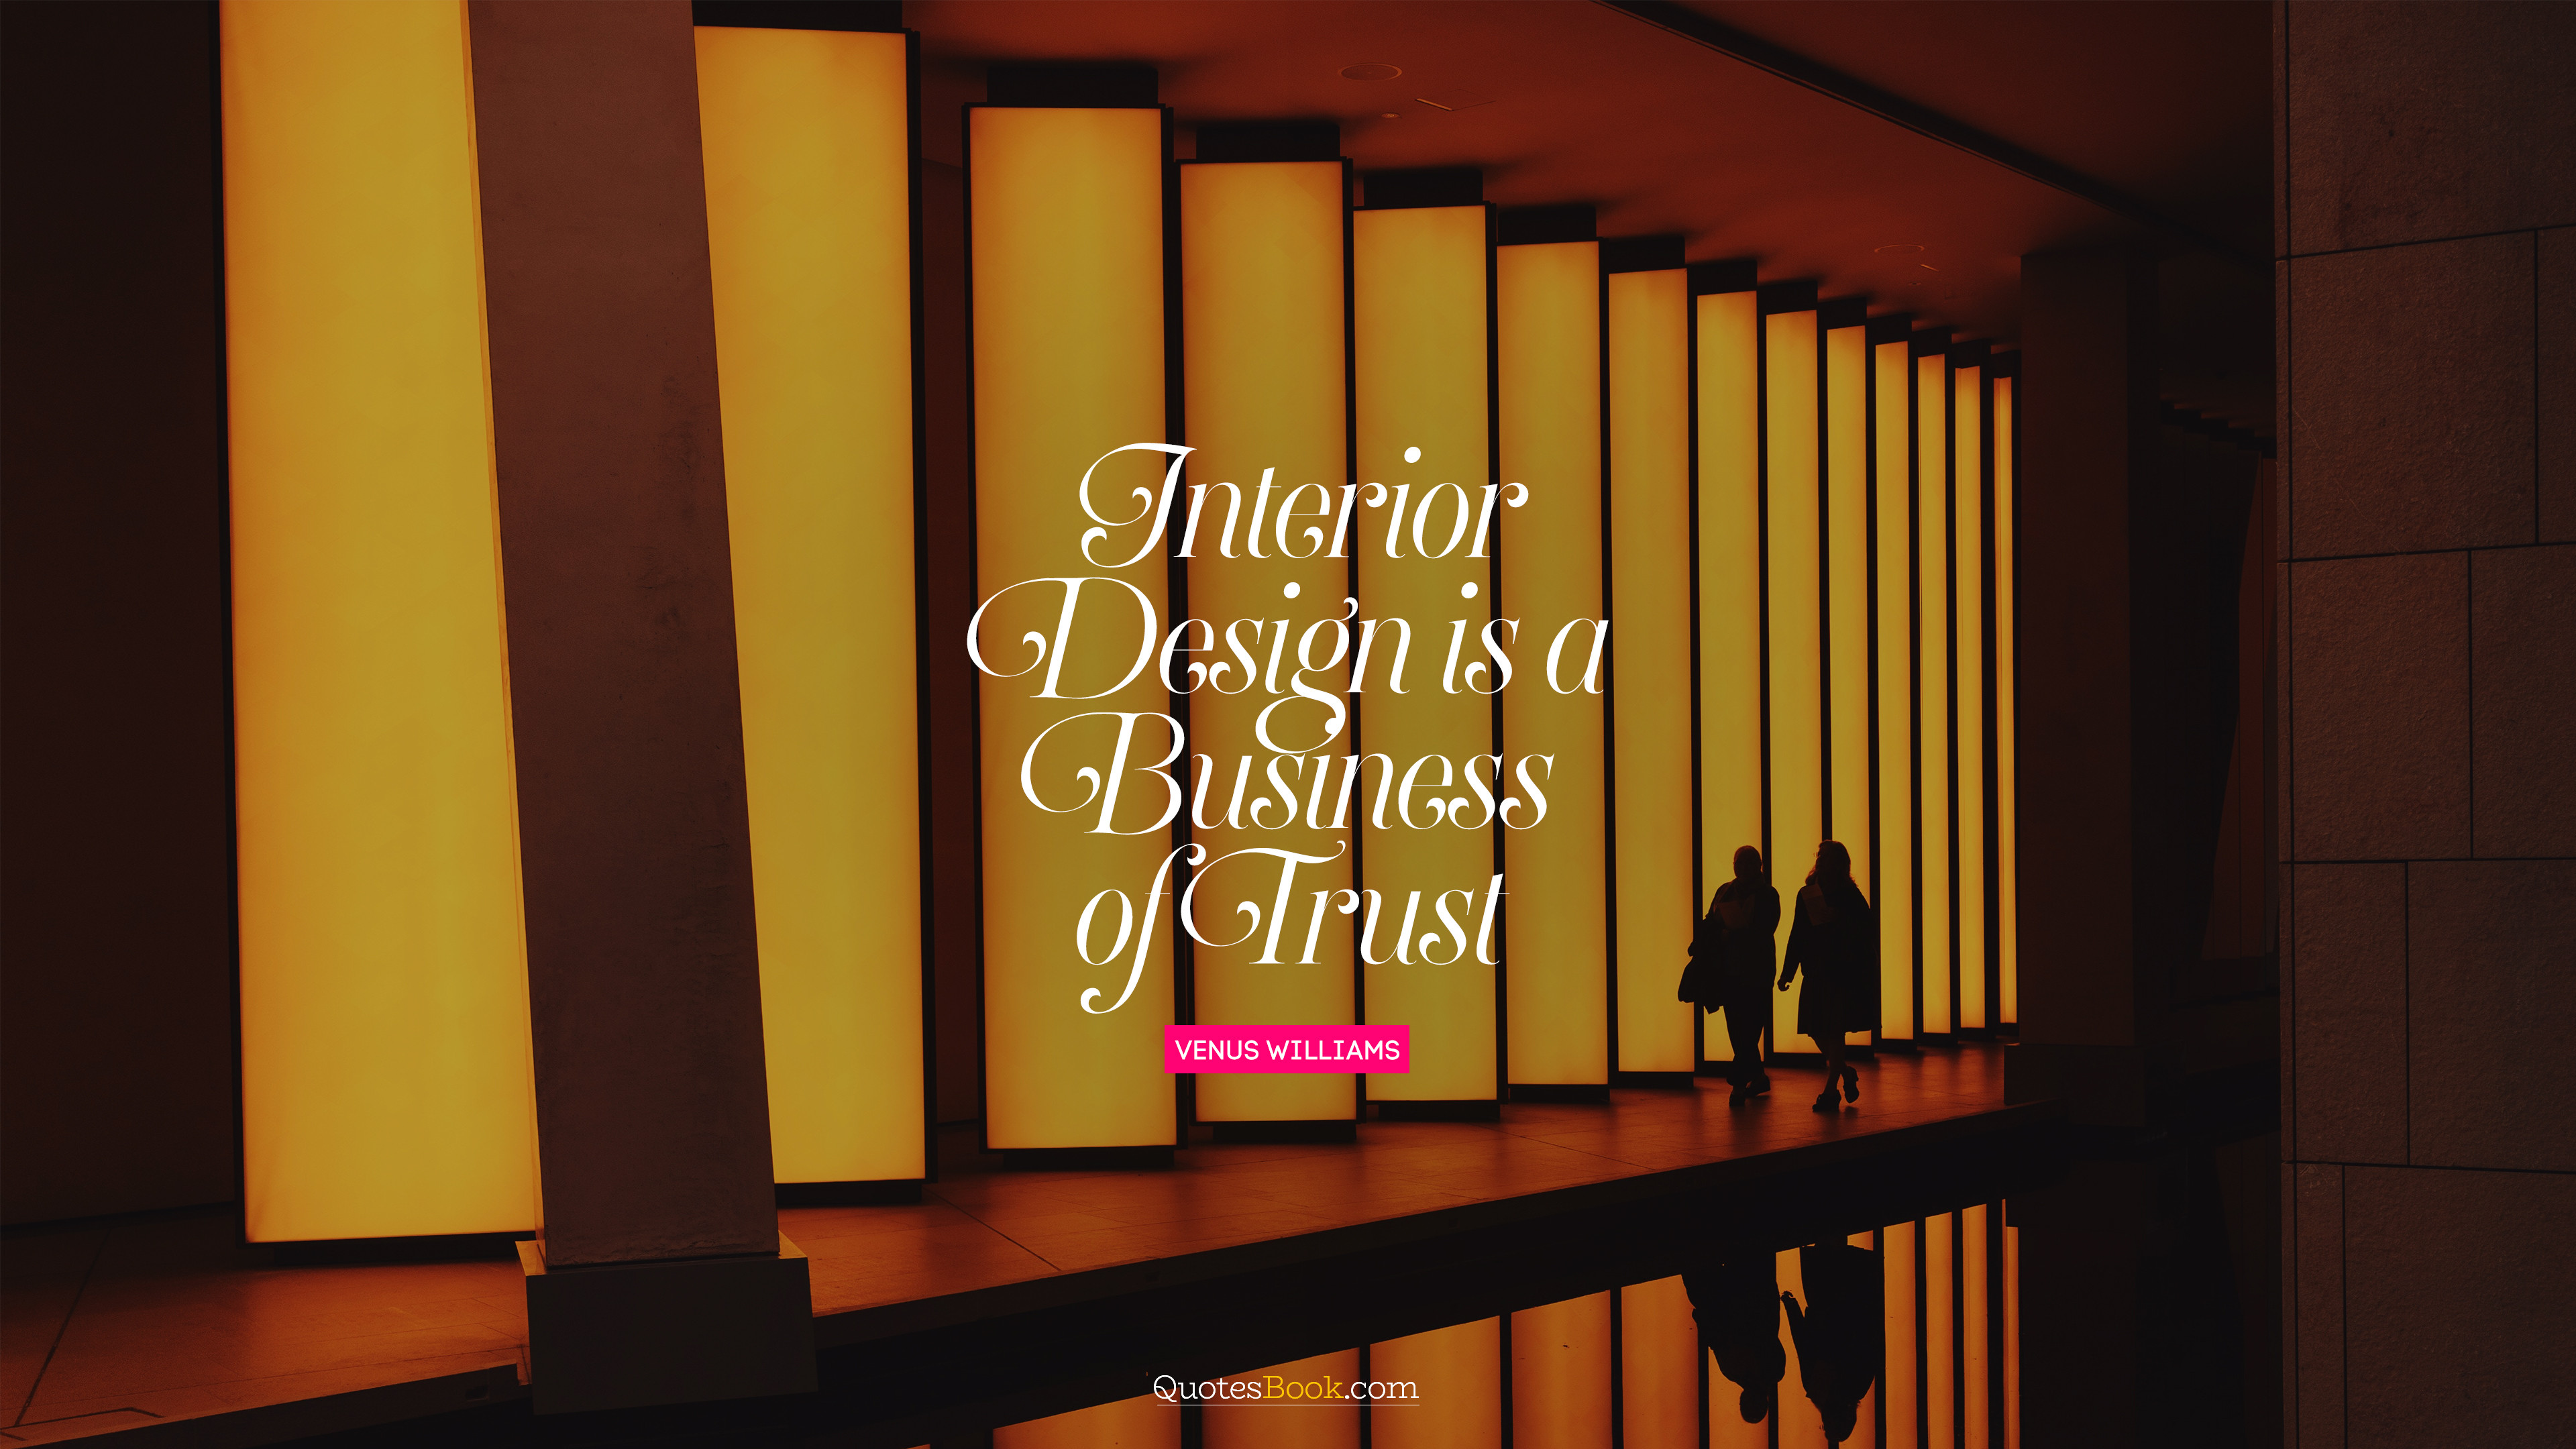 Interior Design Is A Business Of Trust Quote By Venus